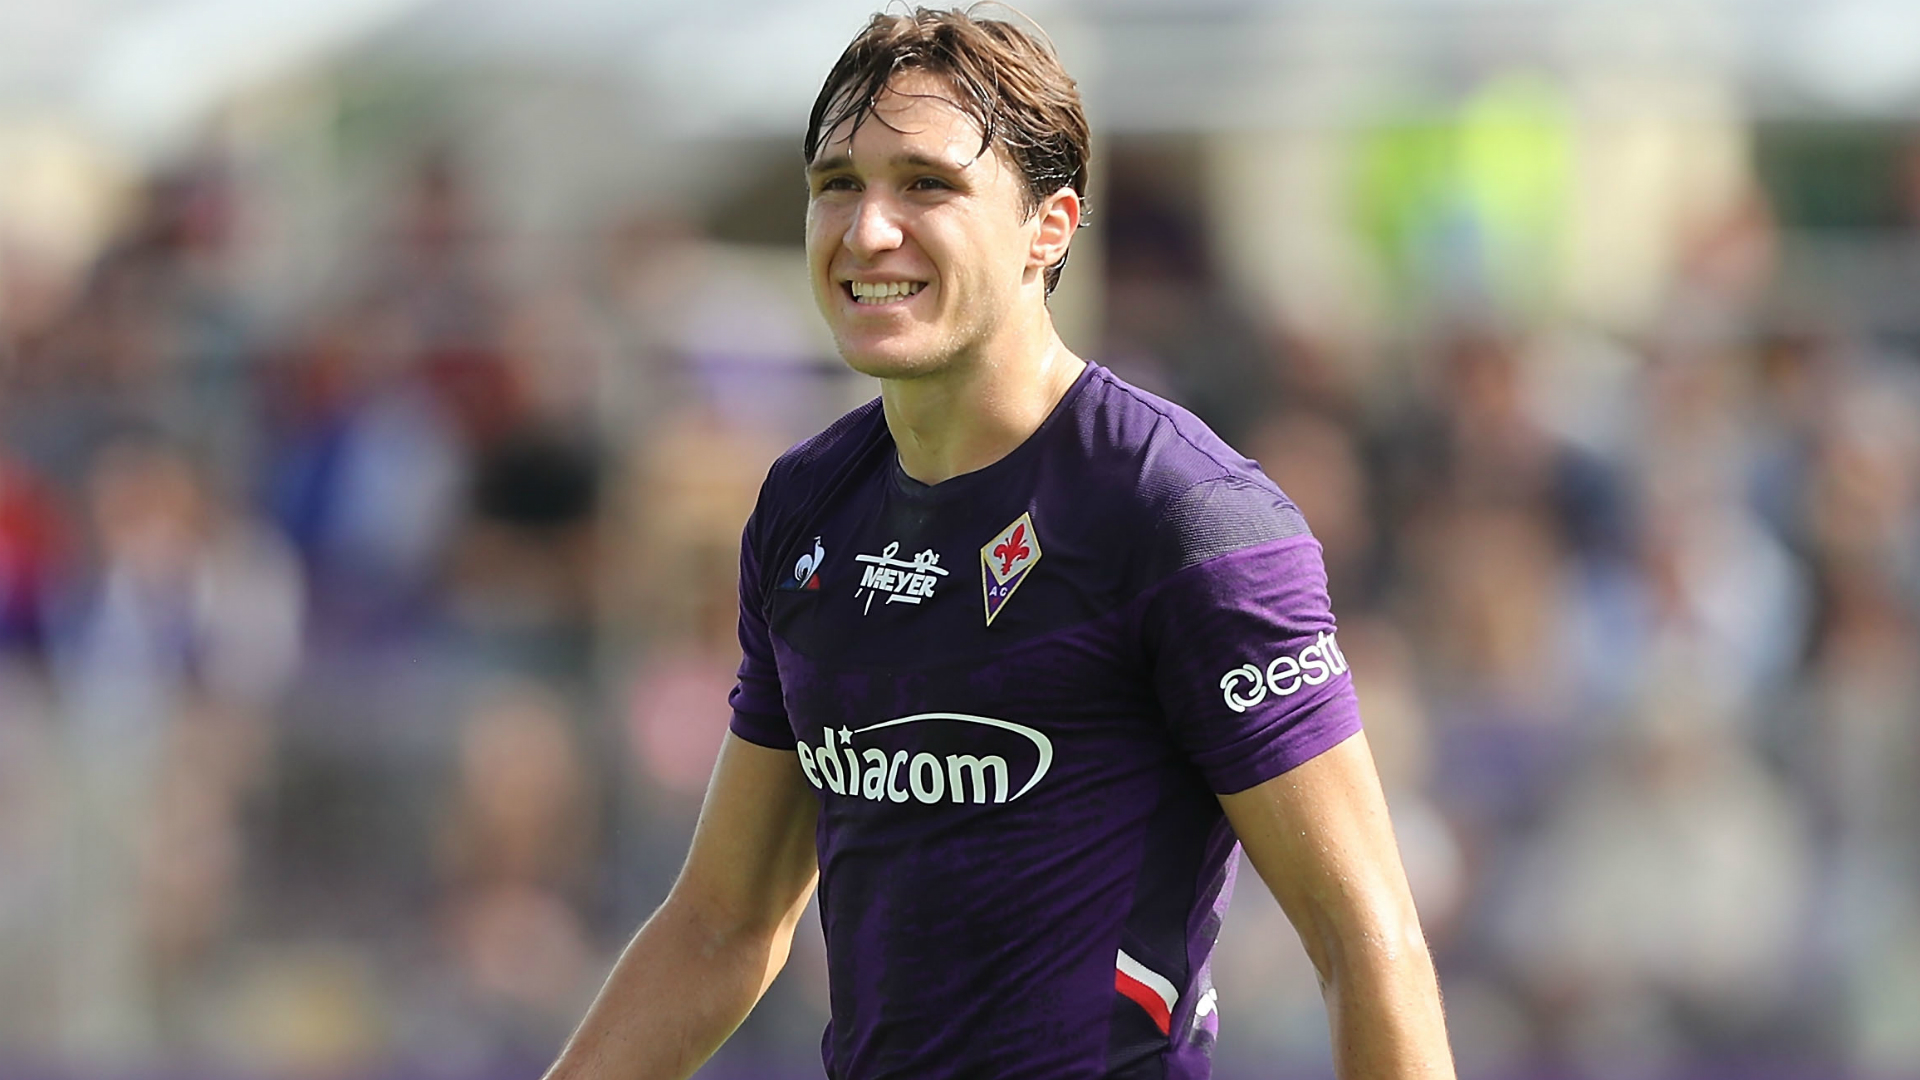 Rocco Commisso was asked about Fiorentina star Federico Chiesa and his future in Florence.